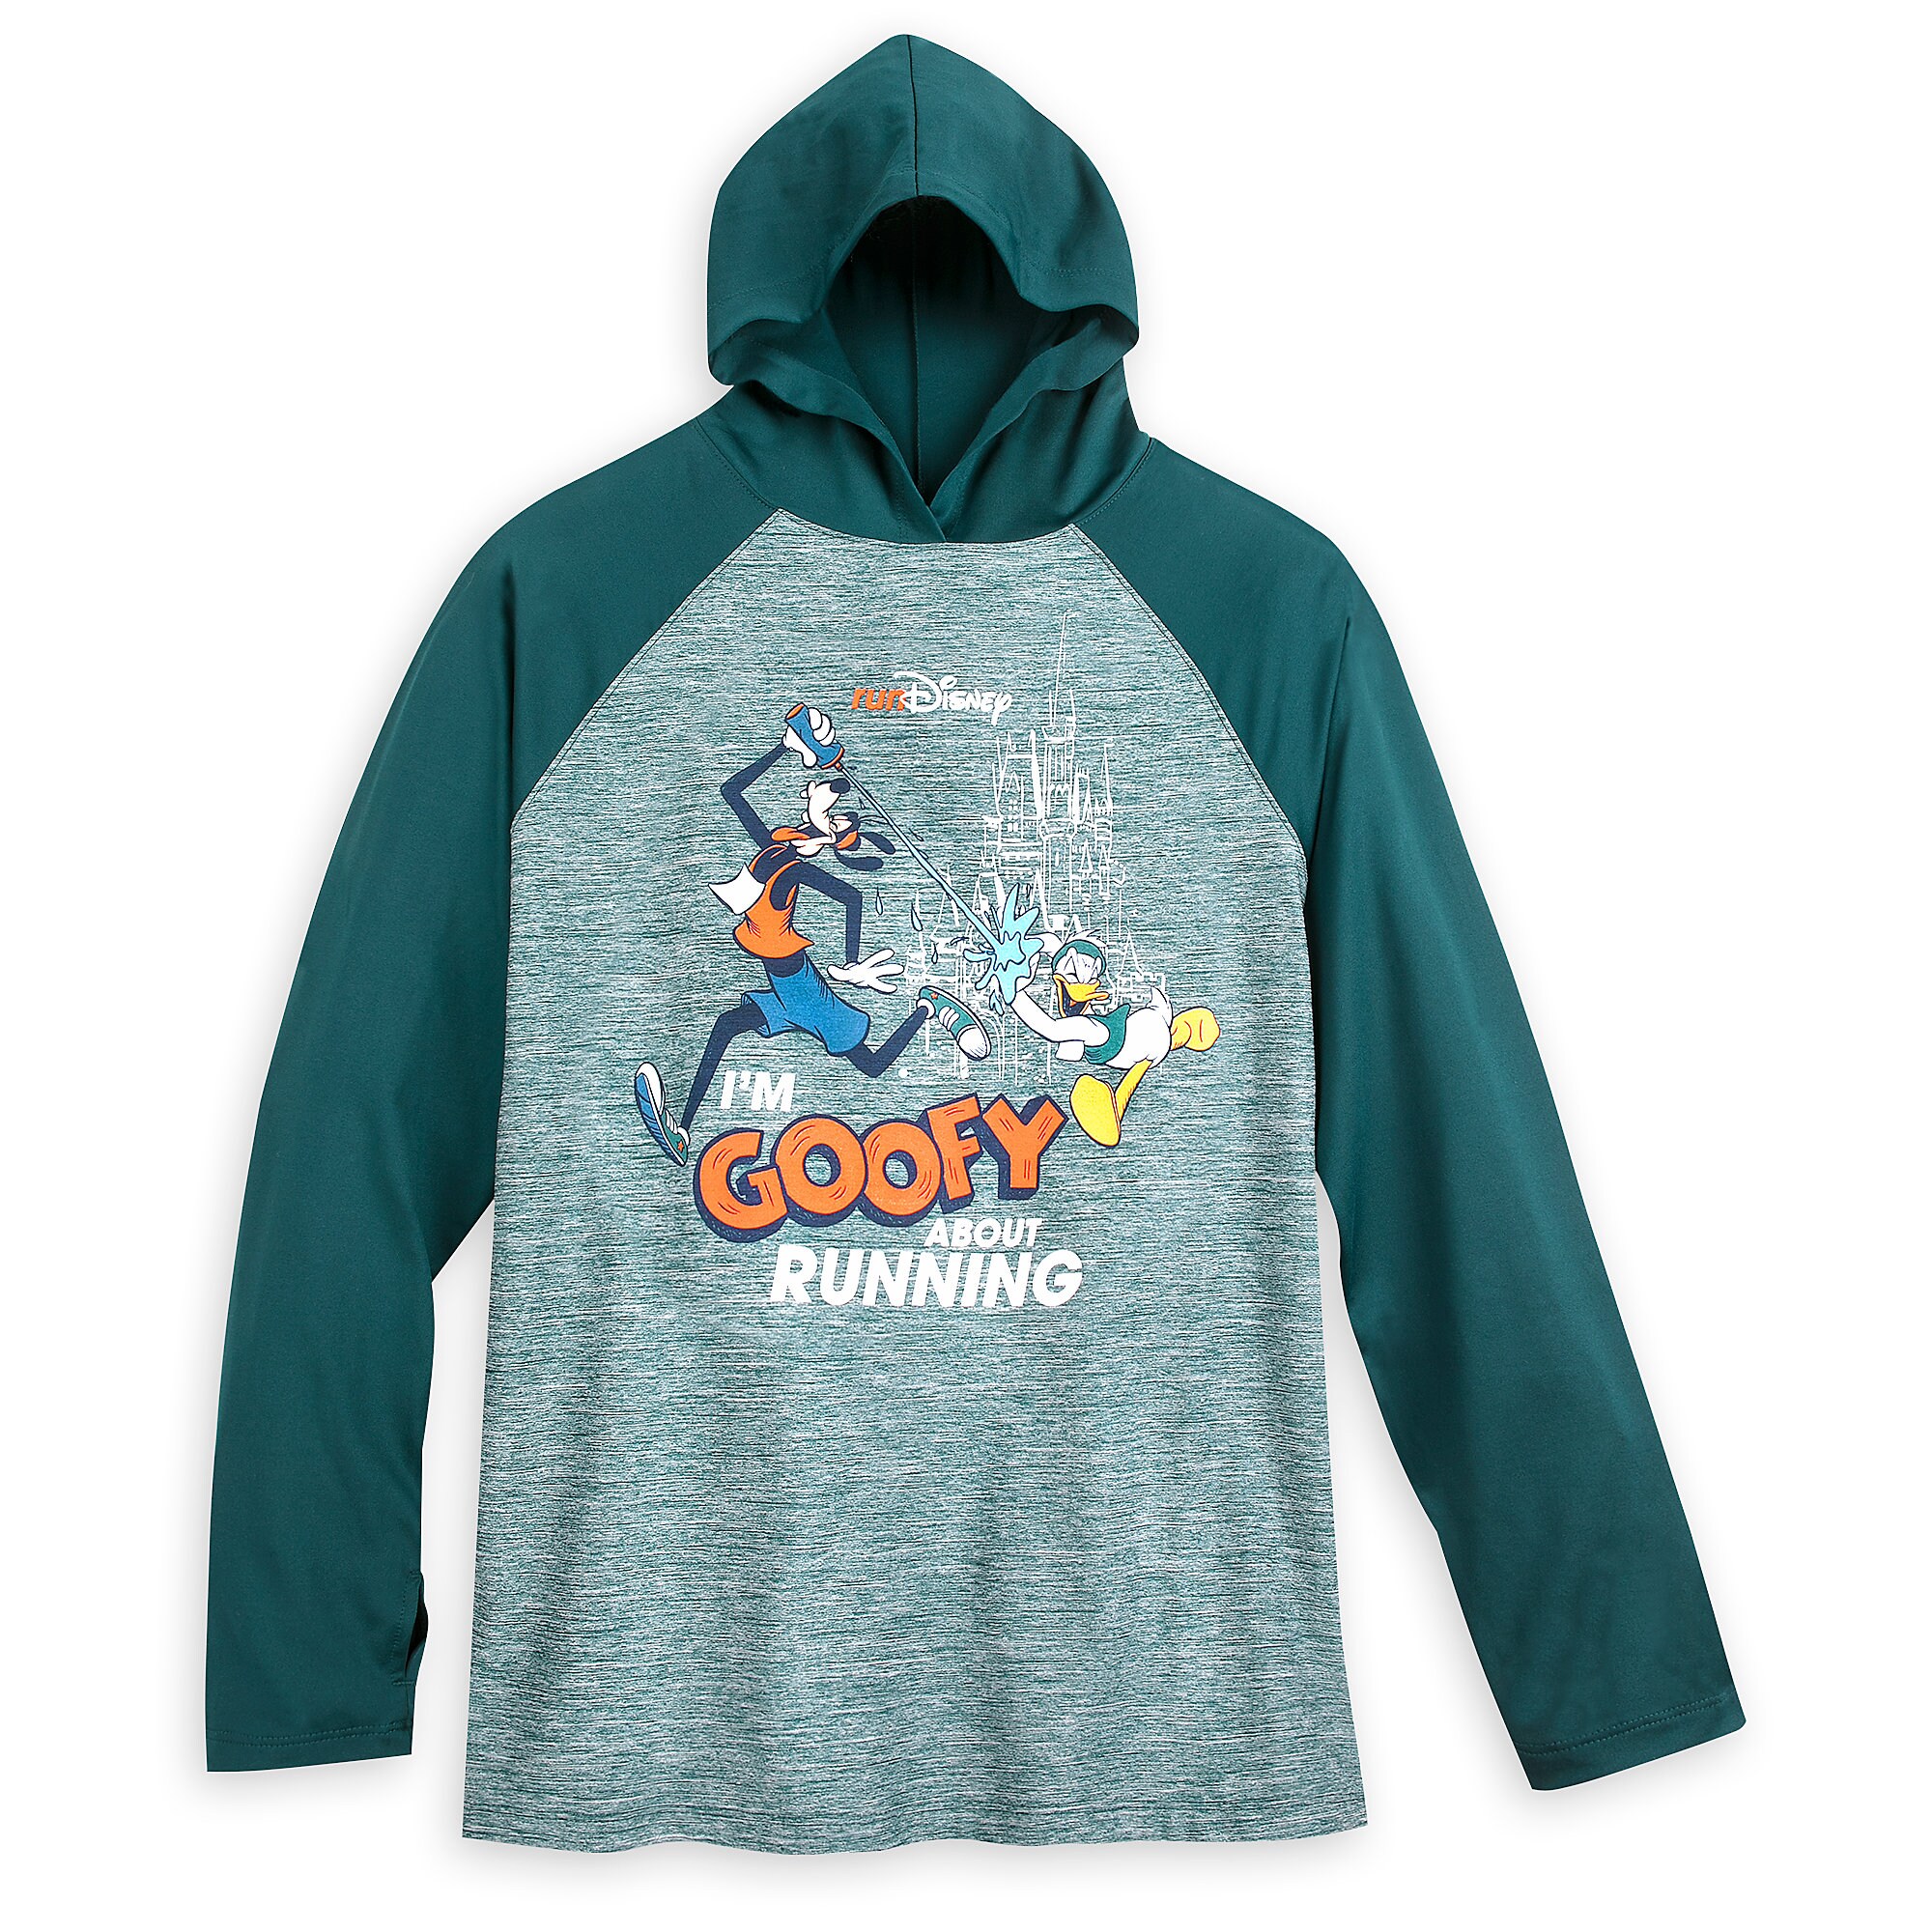 Goofy runDisney Long Sleeve Hooded Performance Top for Adults